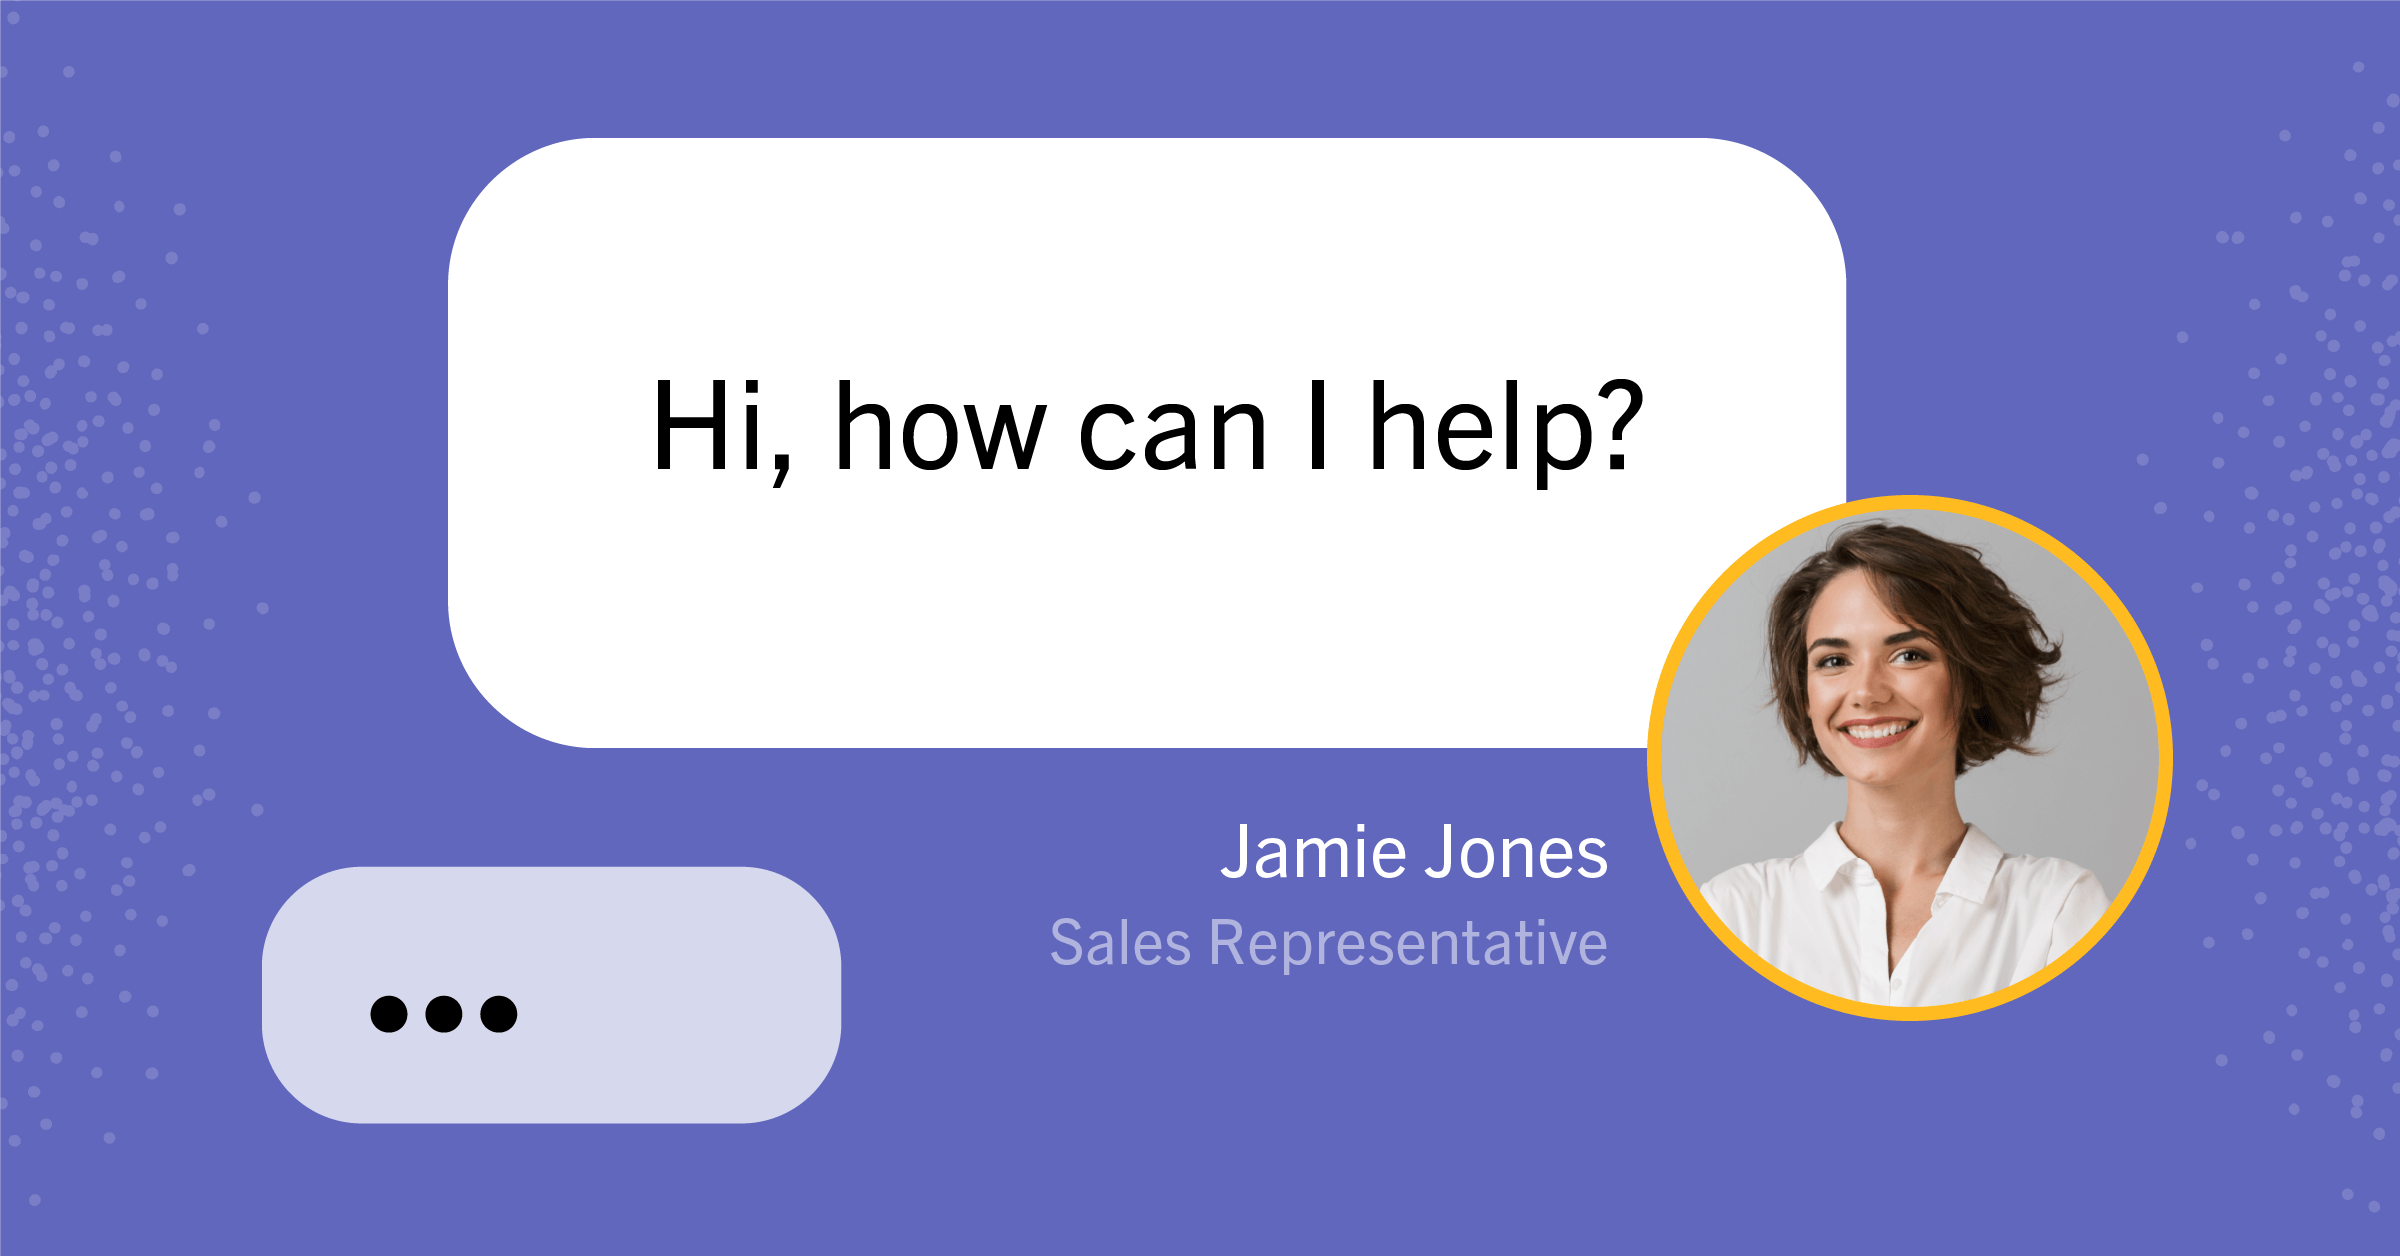 live chat chatbots in Mattermost